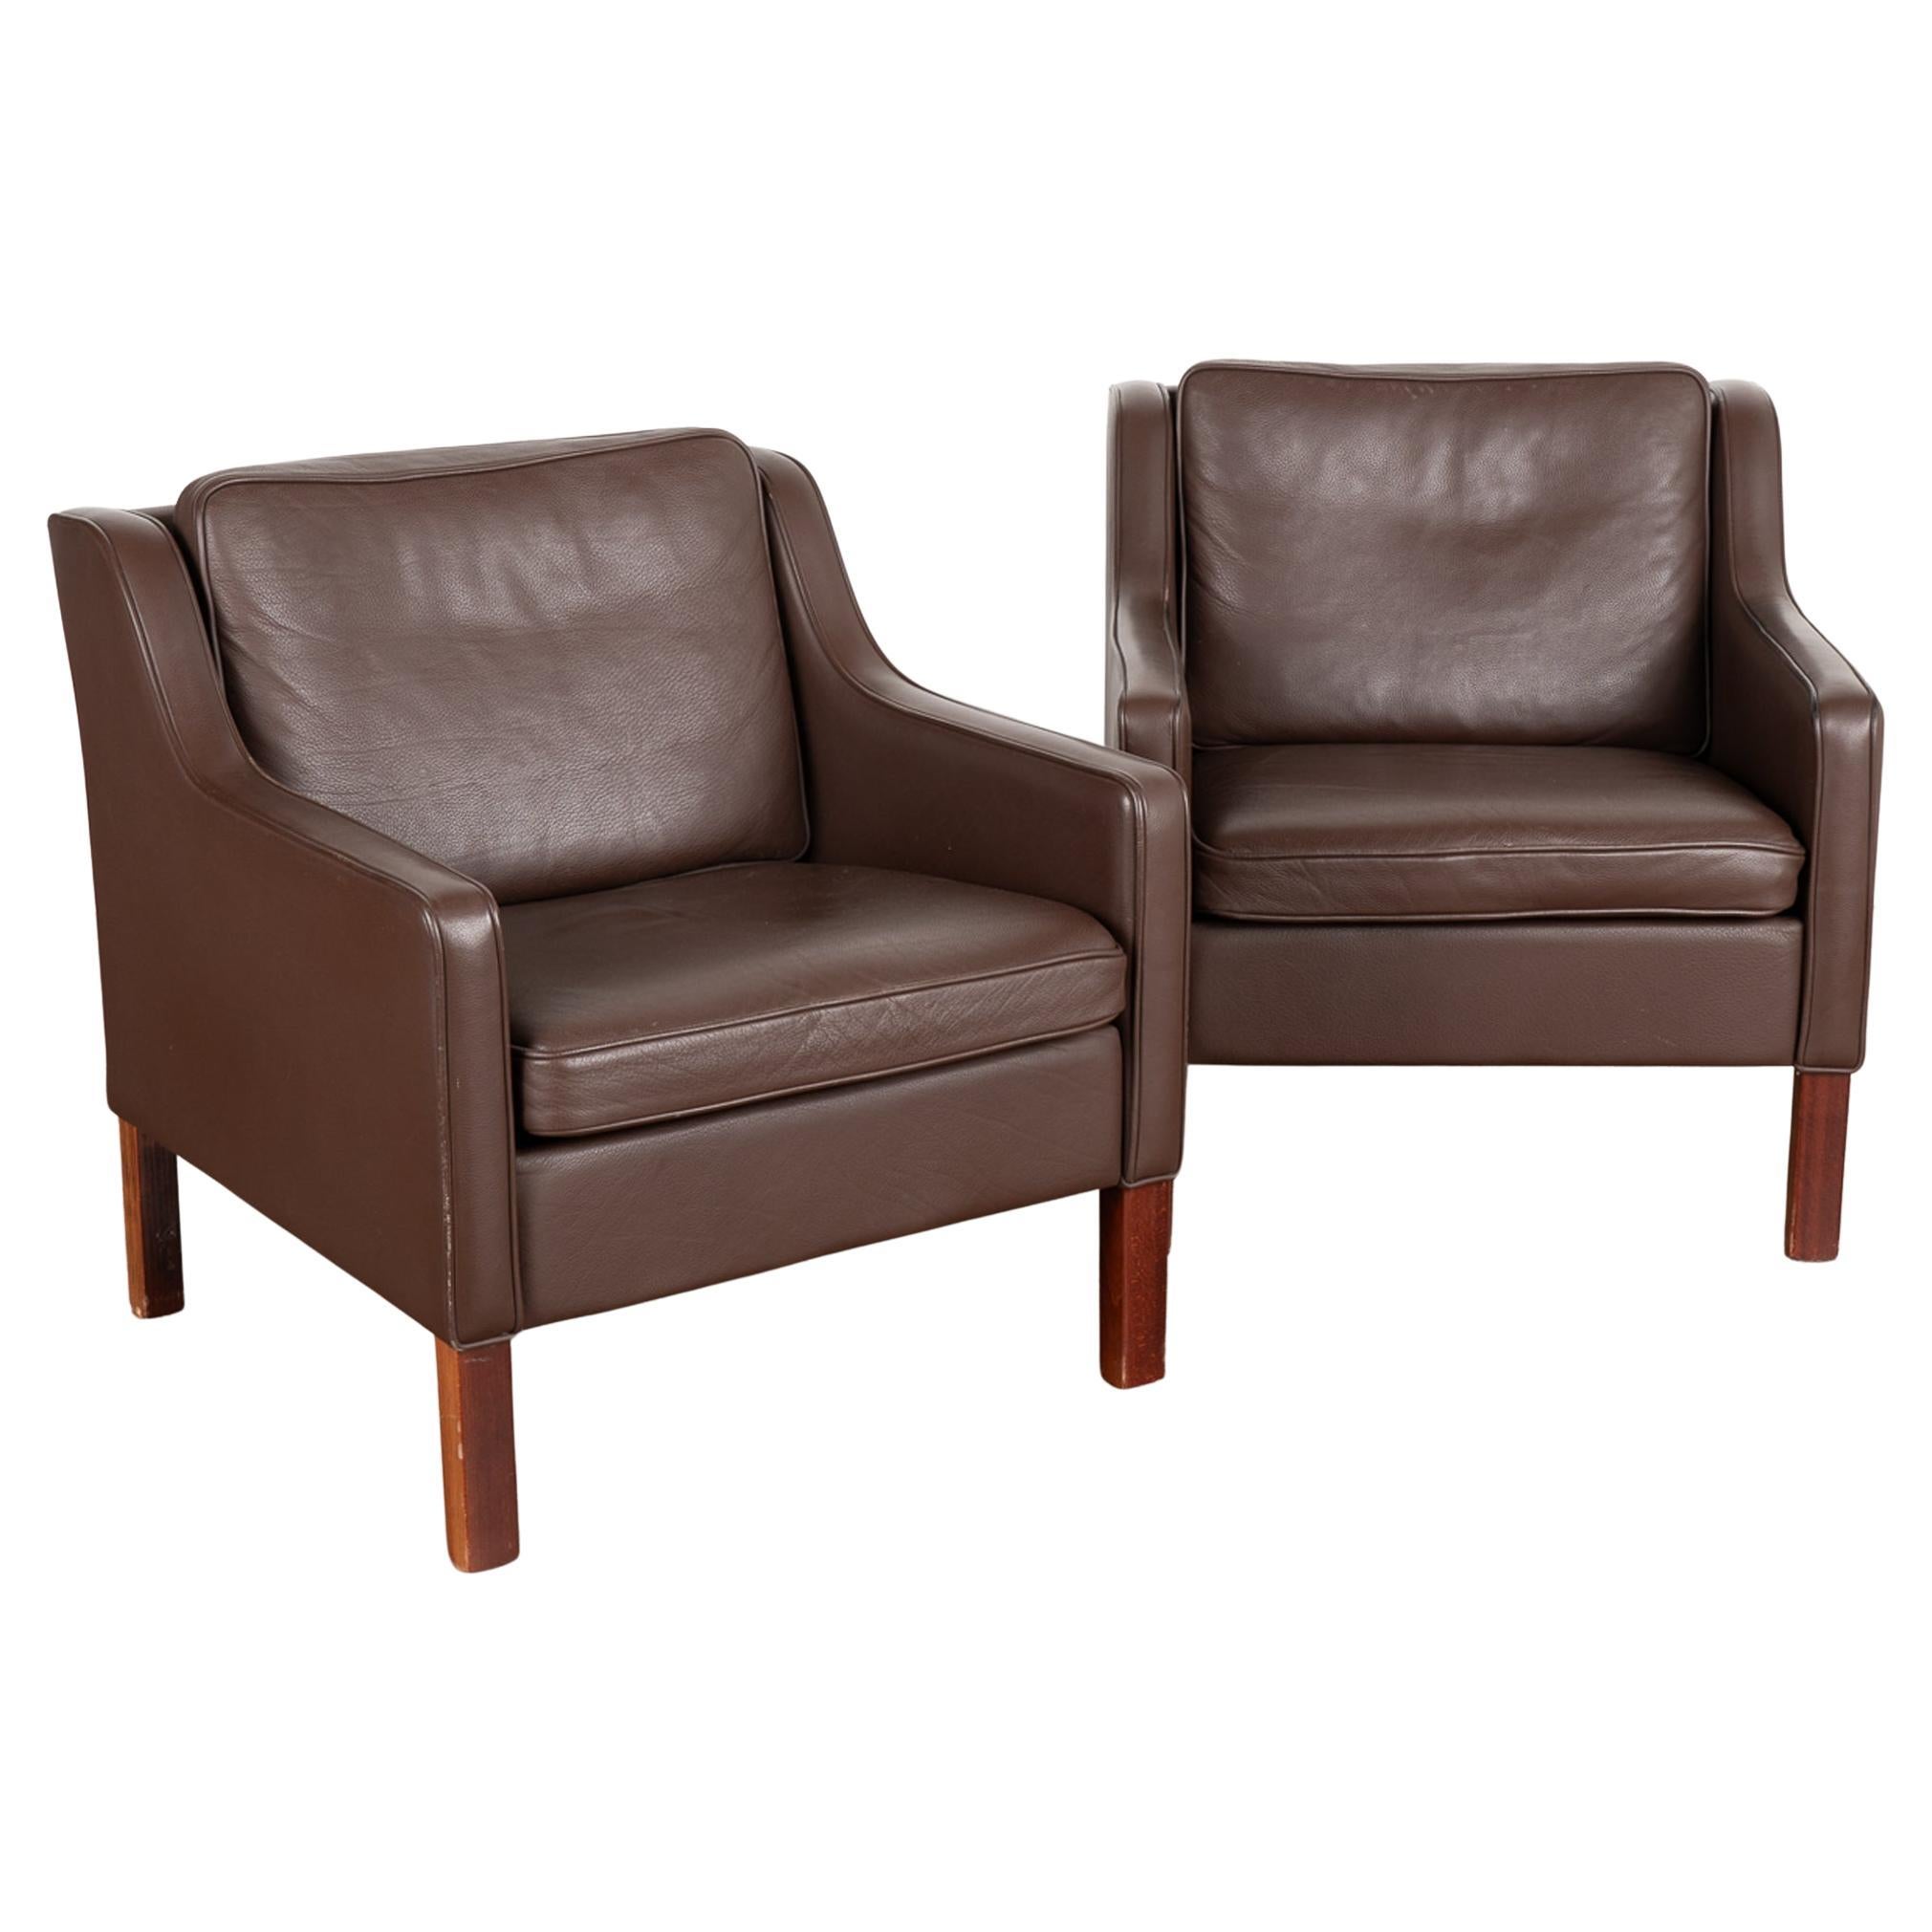 Pair, Midcentury Brown Leather Arm Chairs, Denmark, circa 1960-70 For Sale